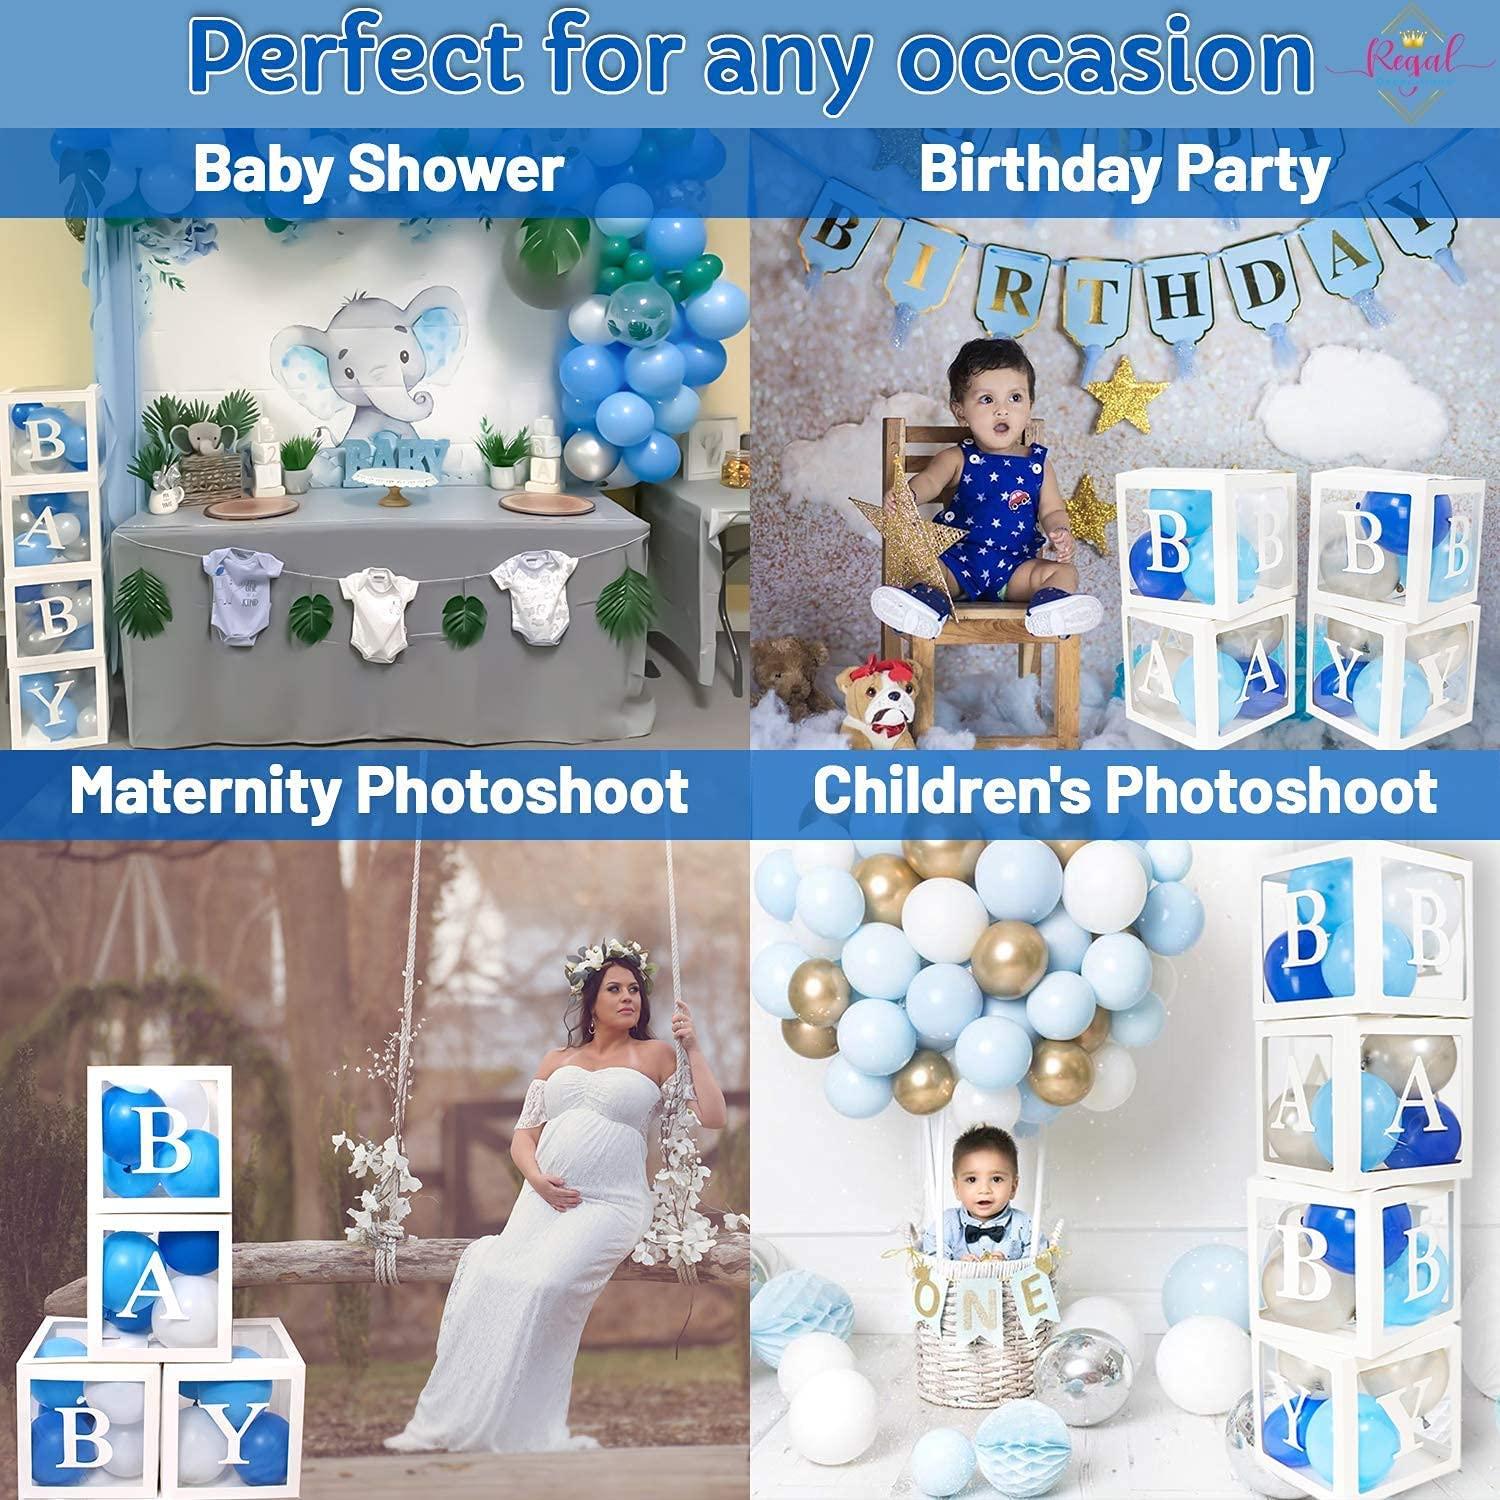 White Gold Baby Shower Box Baby Balloon Boxes 1st Birthday Party